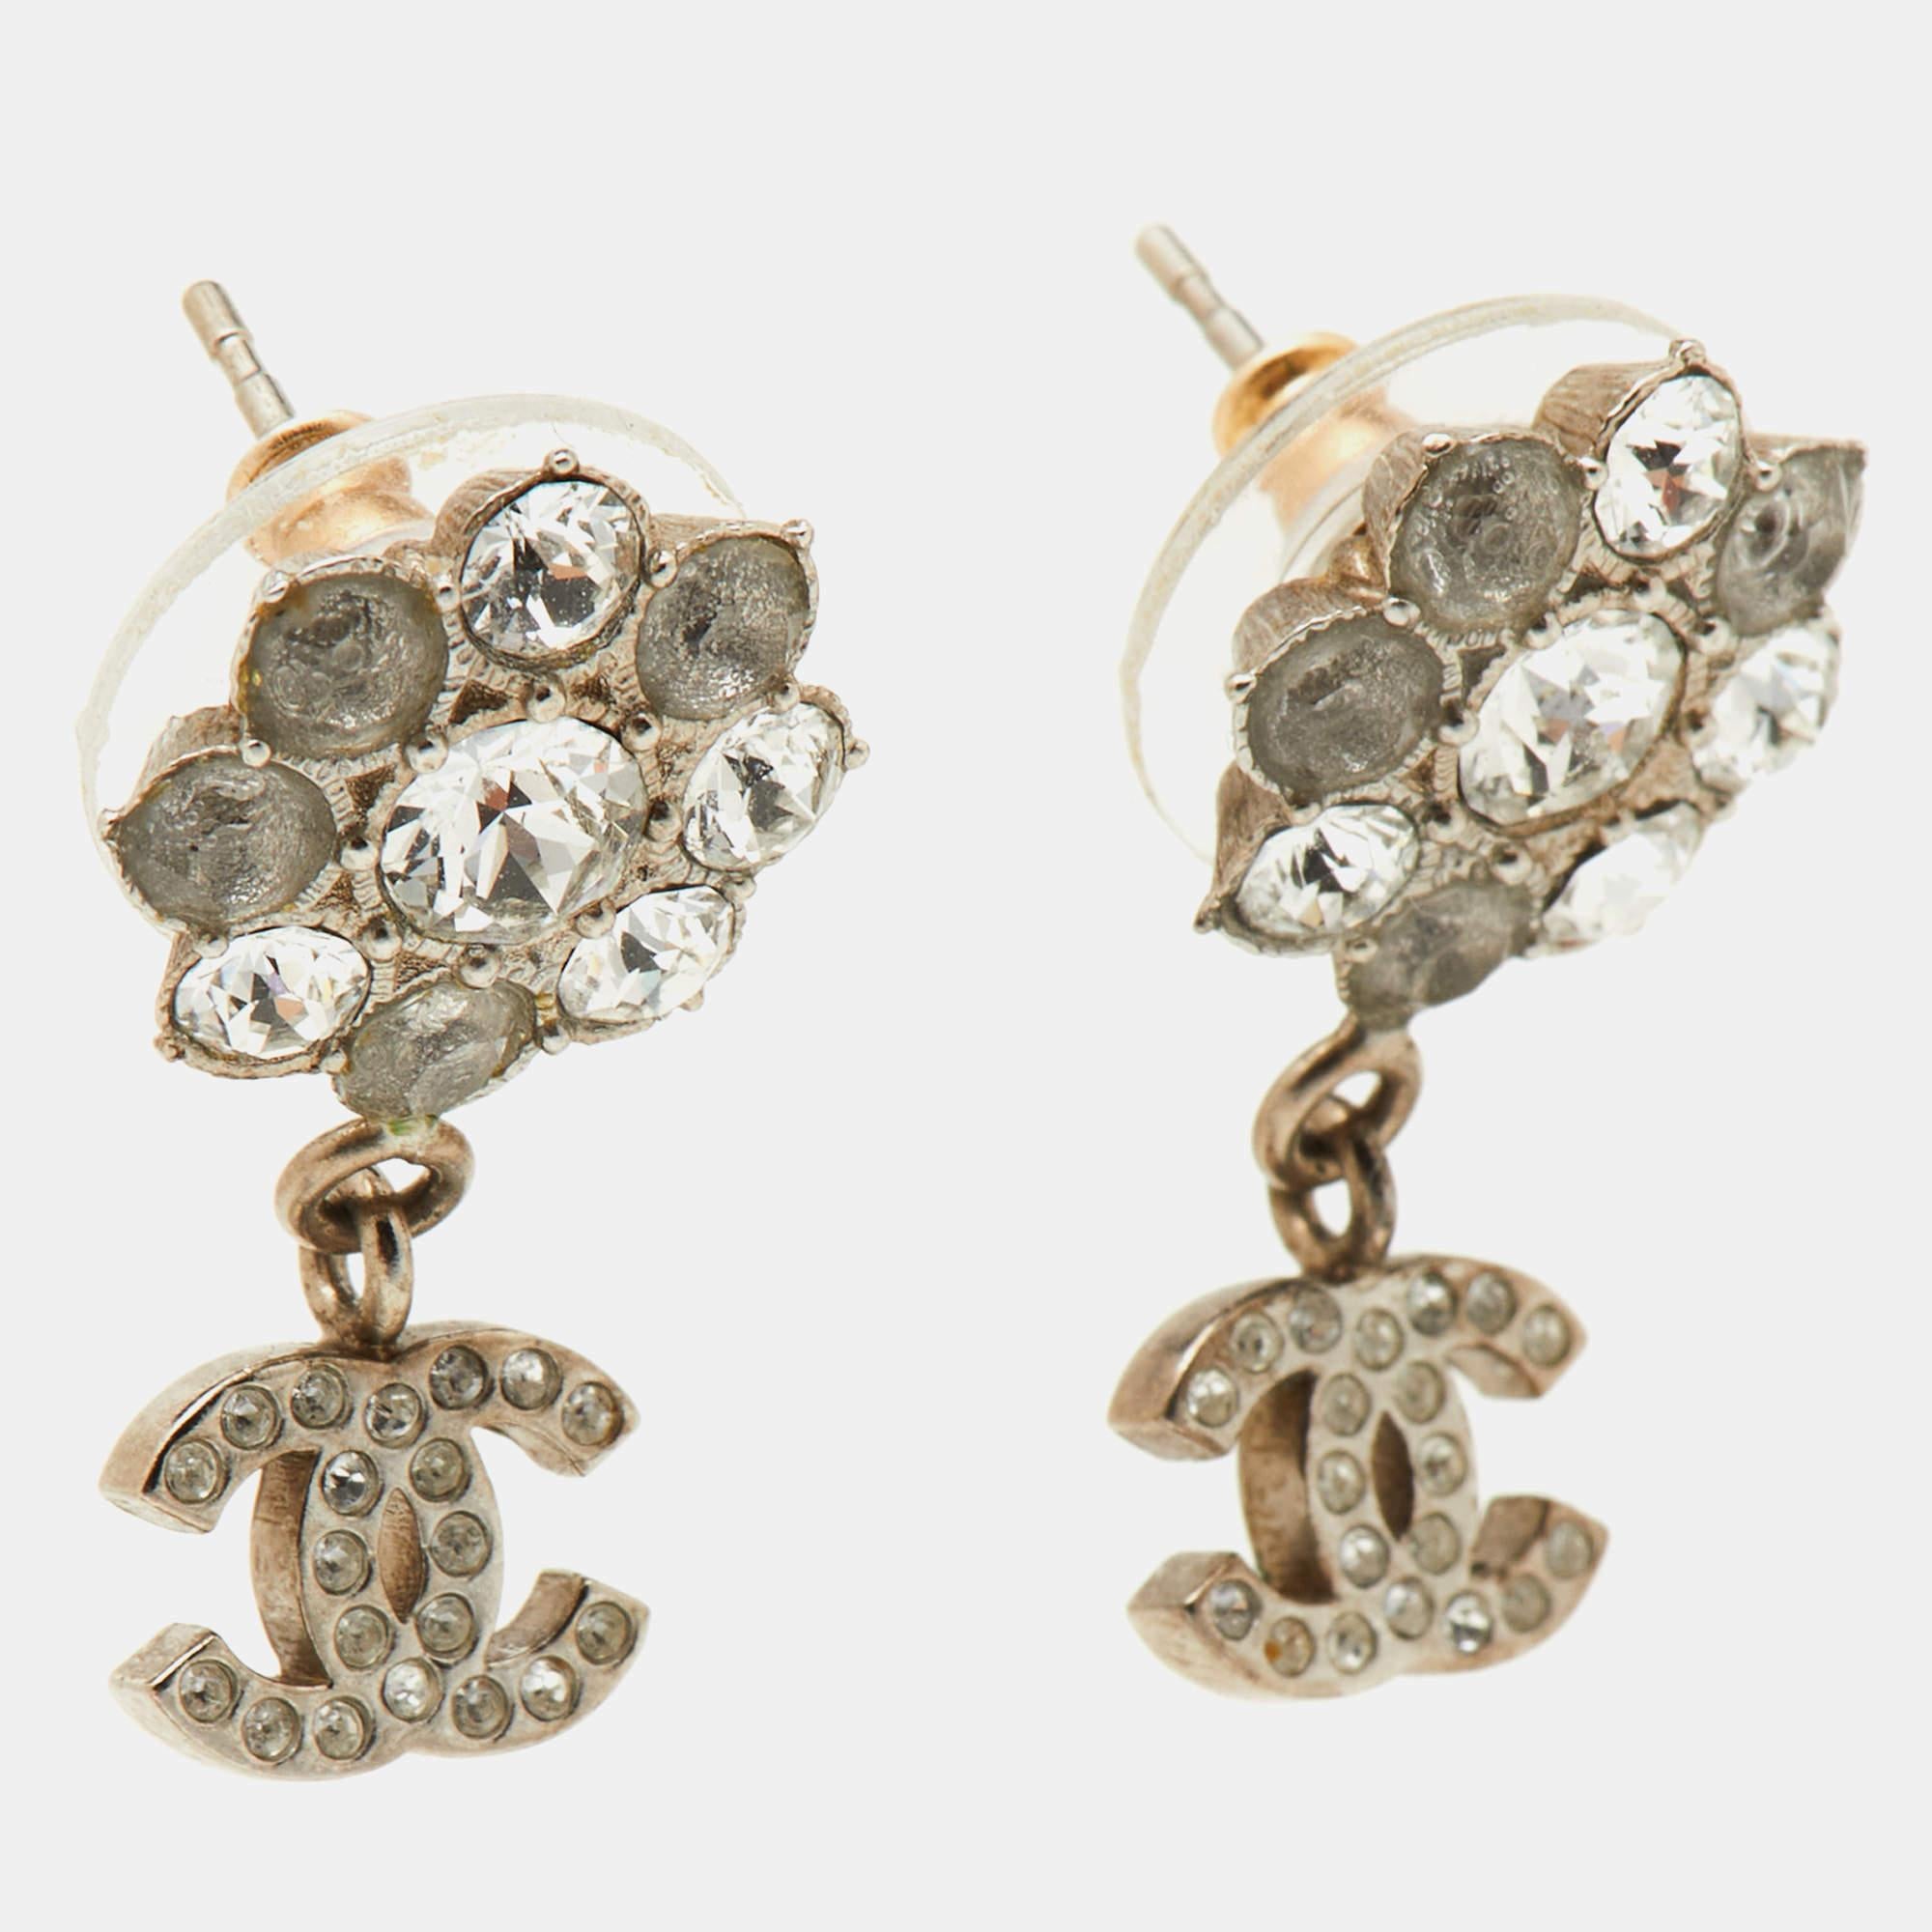 The embellished Camellia motif accompanied by the CC logo drops makes this pair of Chanel earrings an accessory to embrace the glamorous look. Style the pair with your casuals as well as formals.

